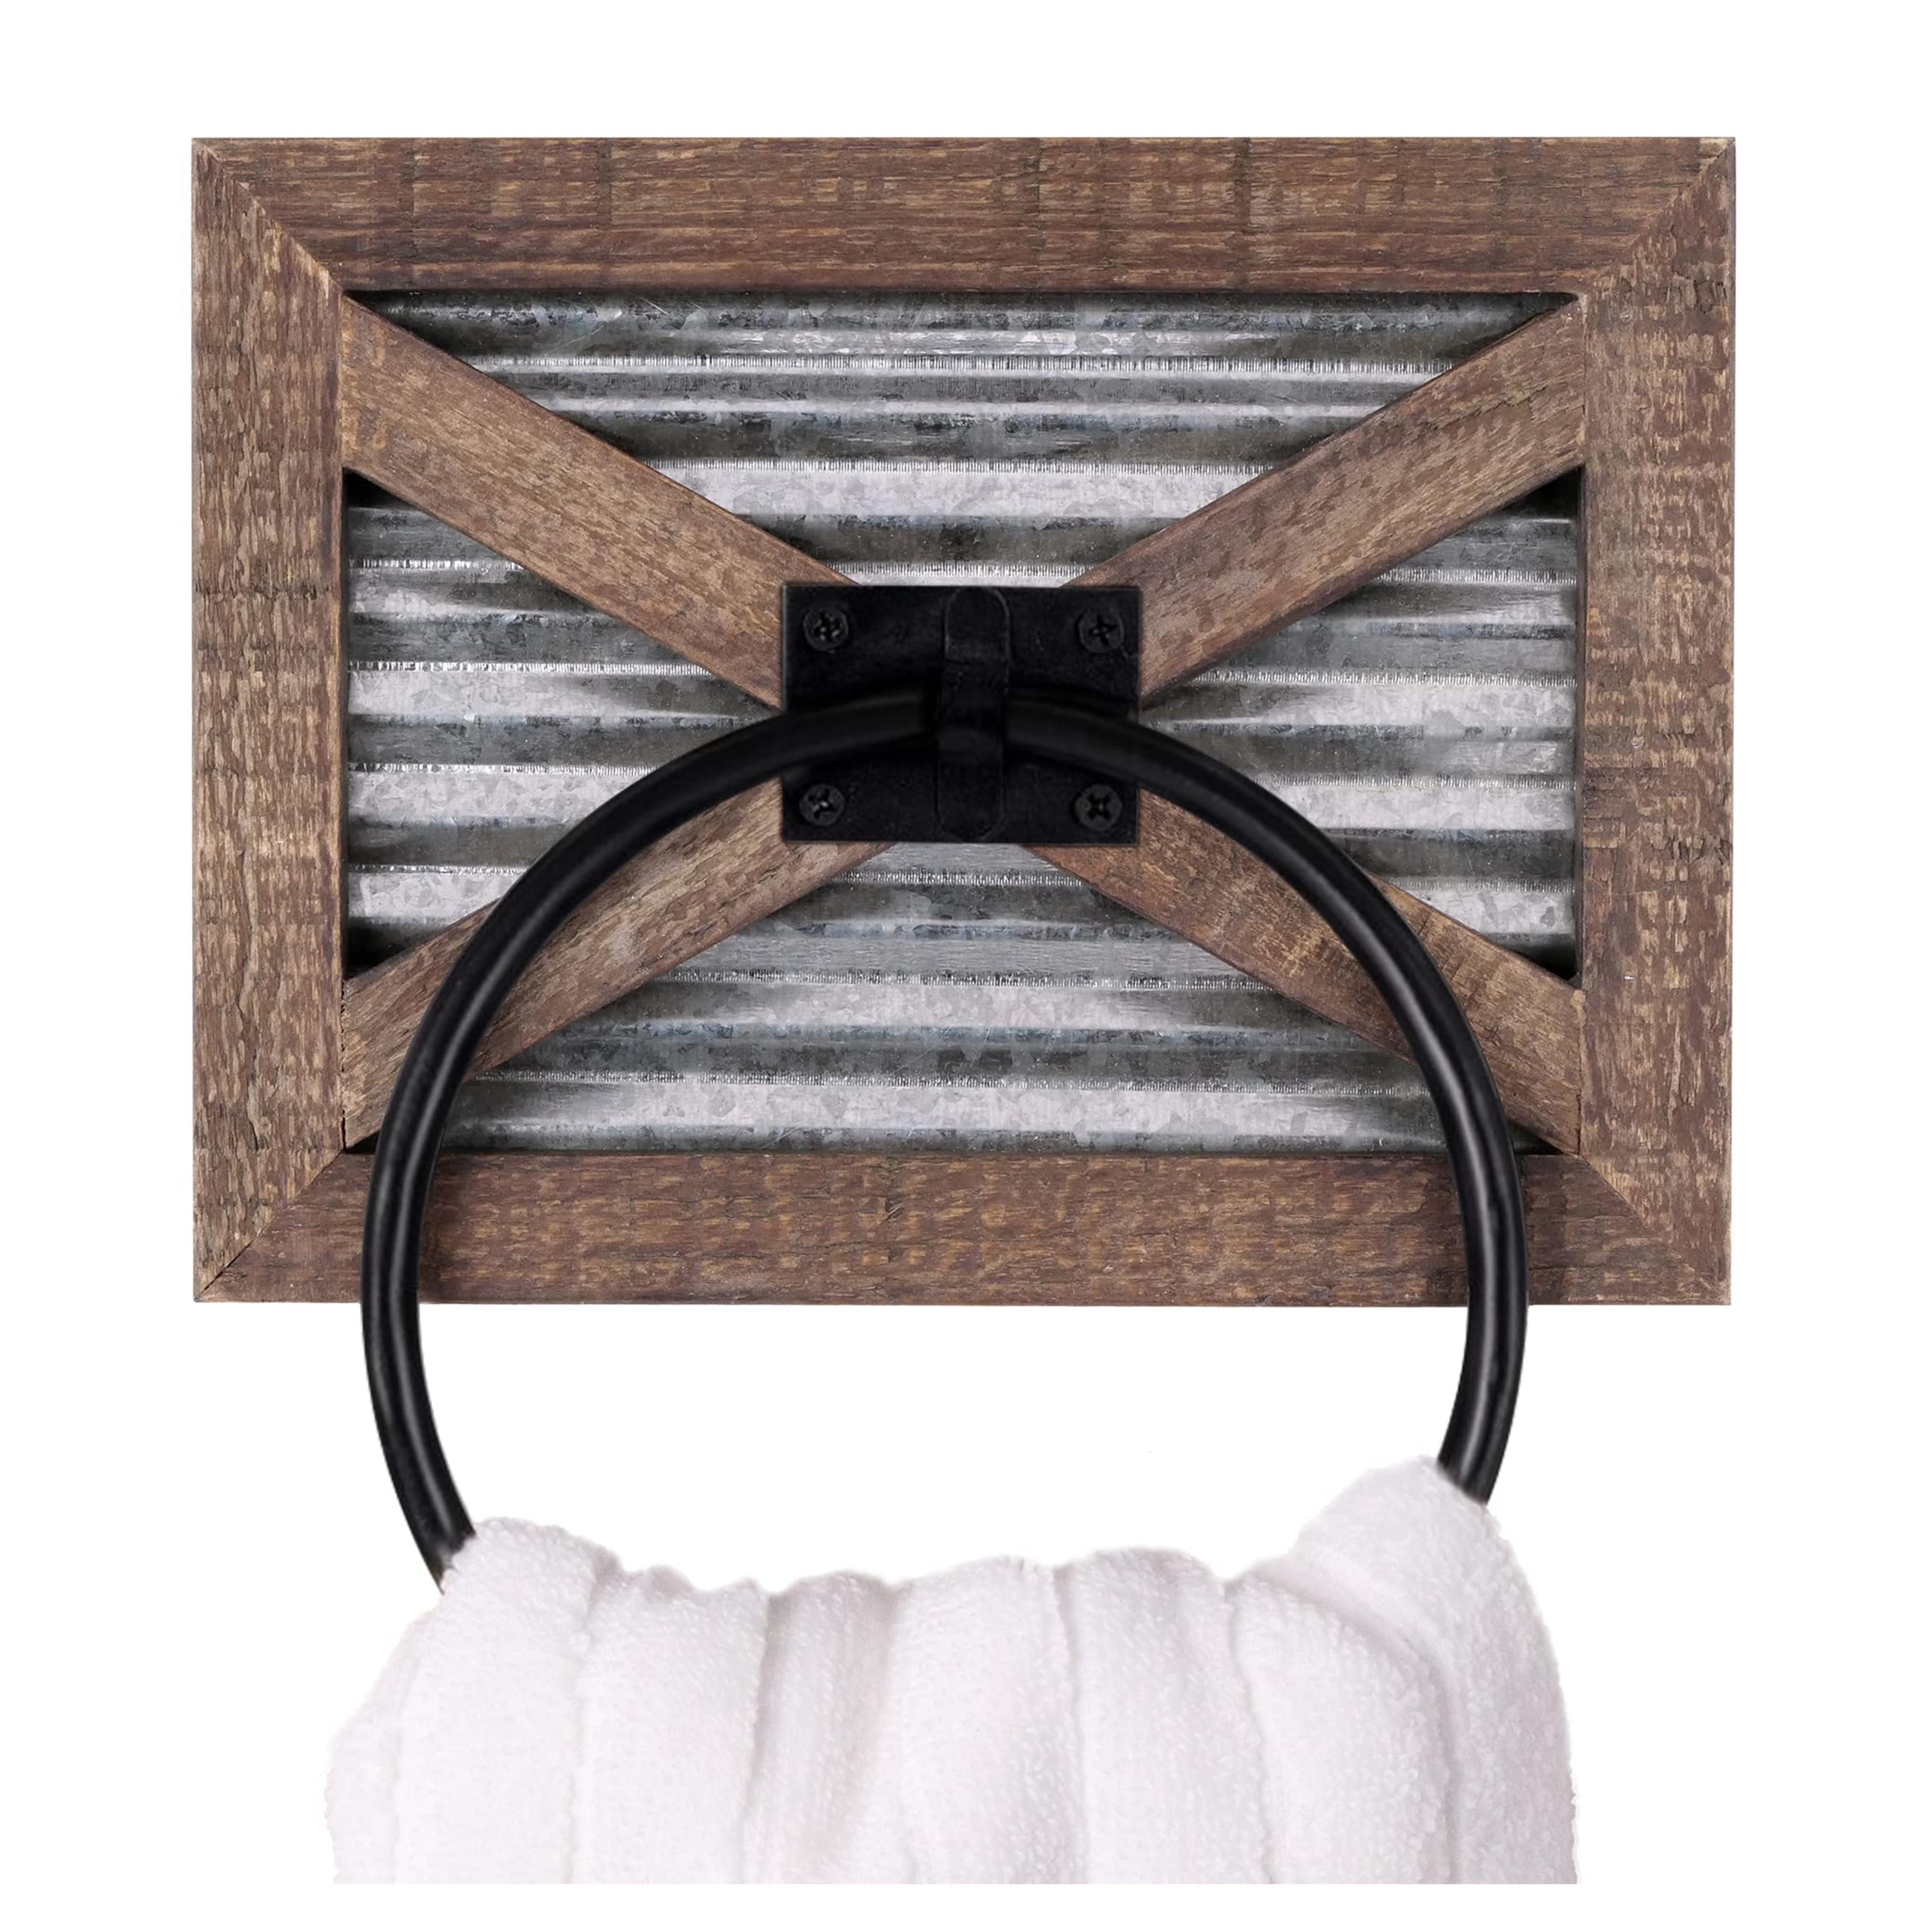 Autumn Alley Barn Door Bathroom Rustic Towel Ring - Wall Mounted Farmhouse Hand Towel Holder - Mix of Wood and Galvanized Metal & Black Ring for Country Charm – Easy to Install Vintage Home Décor